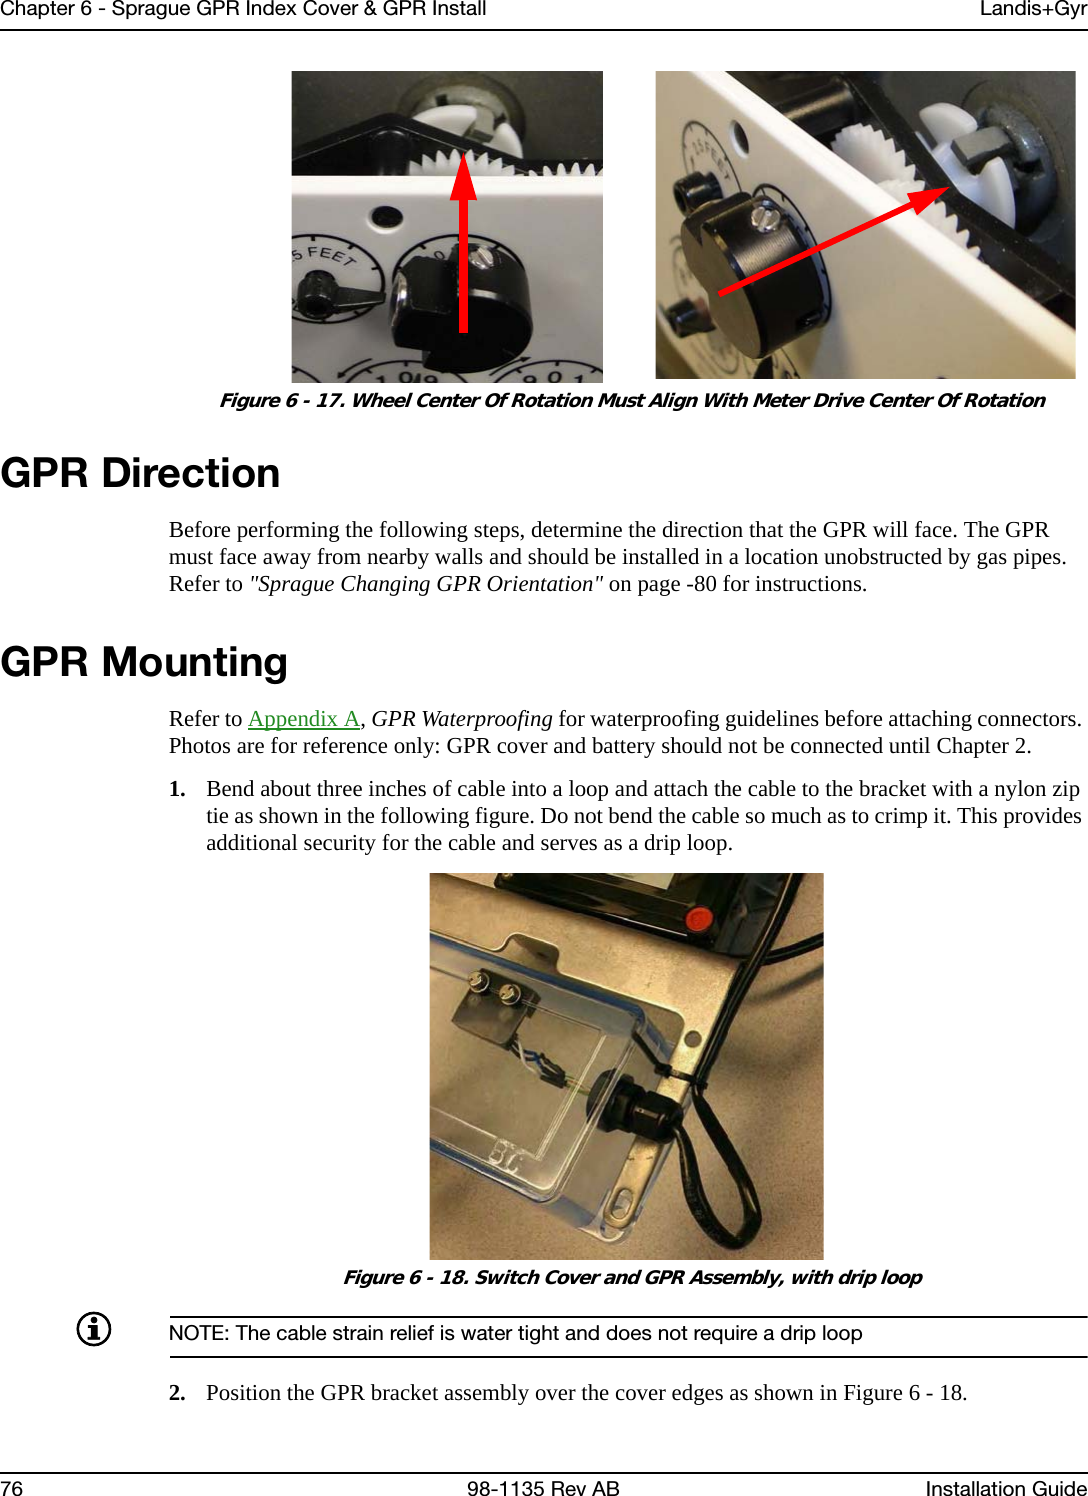 Chapter 6 - Sprague GPR Index Cover &amp; GPR Install Landis+Gyr76 98-1135 Rev AB Installation Guide Figure 6 - 17. Wheel Center Of Rotation Must Align With Meter Drive Center Of RotationGPR DirectionBefore performing the following steps, determine the direction that the GPR will face. The GPR must face away from nearby walls and should be installed in a location unobstructed by gas pipes. Refer to &quot;Sprague Changing GPR Orientation&quot; on page -80 for instructions.GPR MountingRefer to Appendix A, GPR Waterproofing for waterproofing guidelines before attaching connectors. Photos are for reference only: GPR cover and battery should not be connected until Chapter 2.1. Bend about three inches of cable into a loop and attach the cable to the bracket with a nylon zip tie as shown in the following figure. Do not bend the cable so much as to crimp it. This provides additional security for the cable and serves as a drip loop. Figure 6 - 18. Switch Cover and GPR Assembly, with drip loopNOTE: The cable strain relief is water tight and does not require a drip loop2. Position the GPR bracket assembly over the cover edges as shown in Figure 6 - 18.